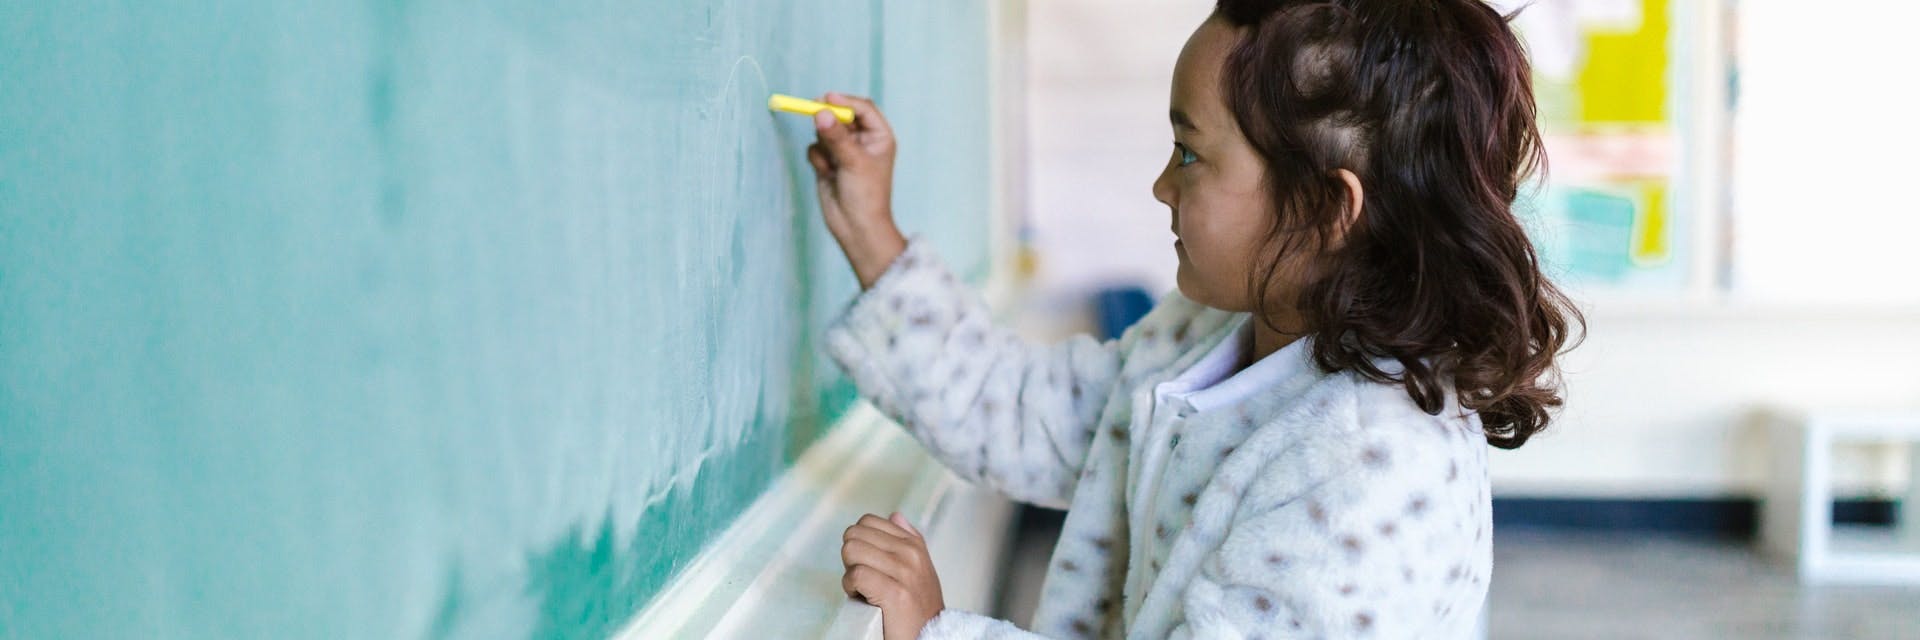 Young girl stands at a chalkboard and works on subtraction activities.